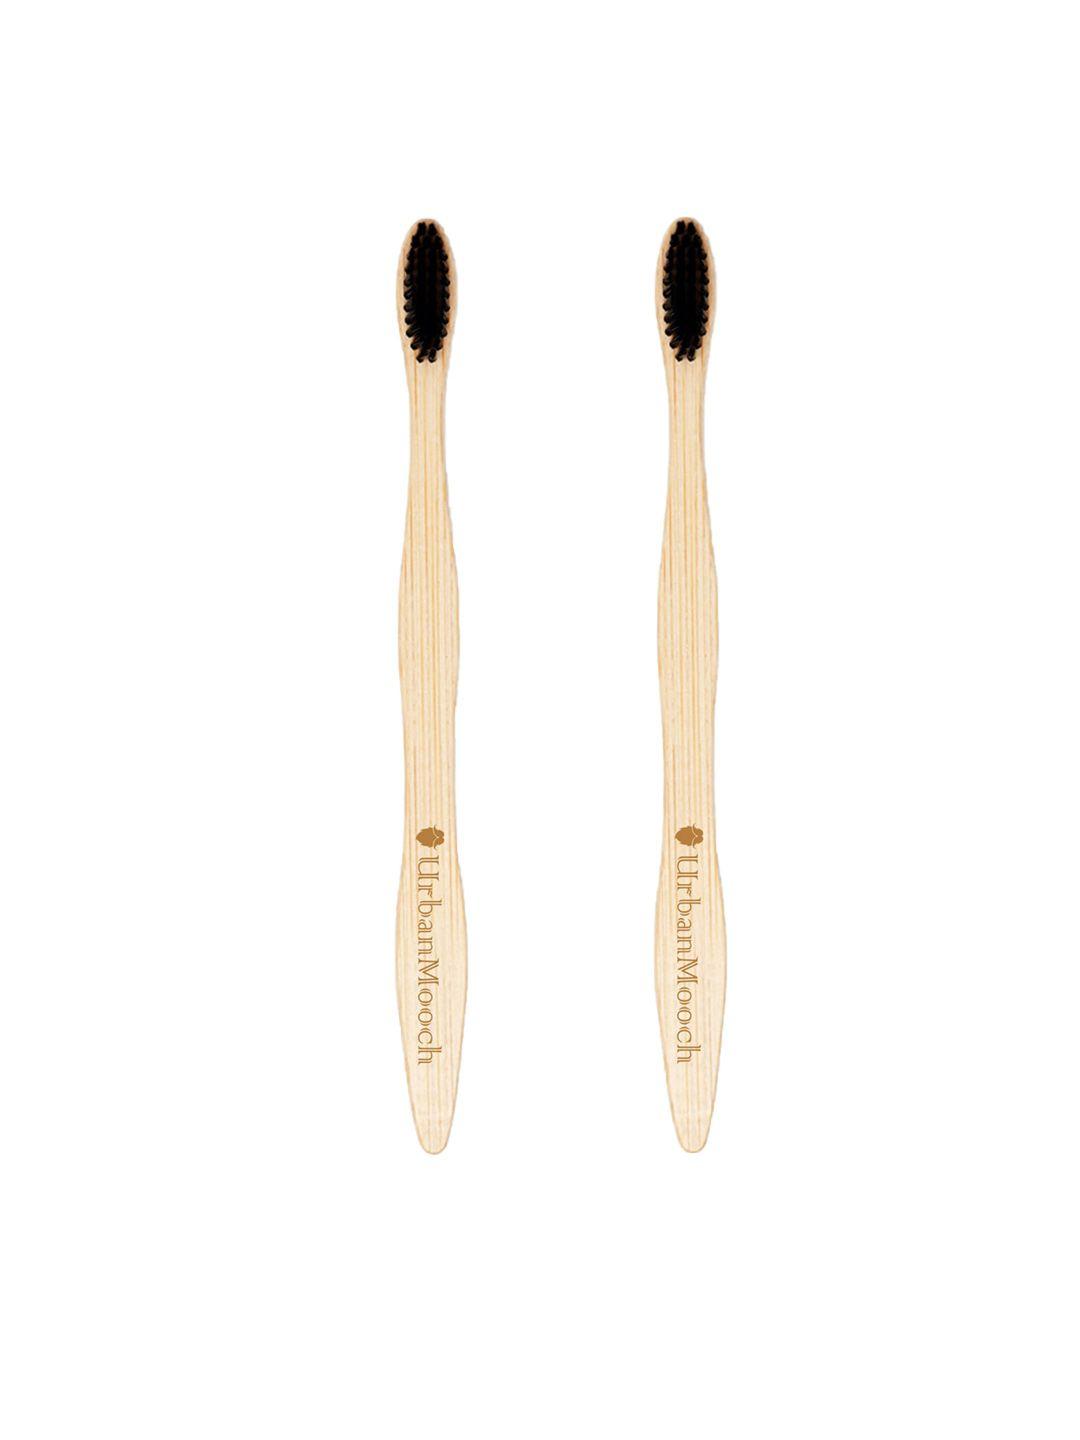 urbanmooch set of 2 bamboo charcoal infused floss-tip bristles toothbrush